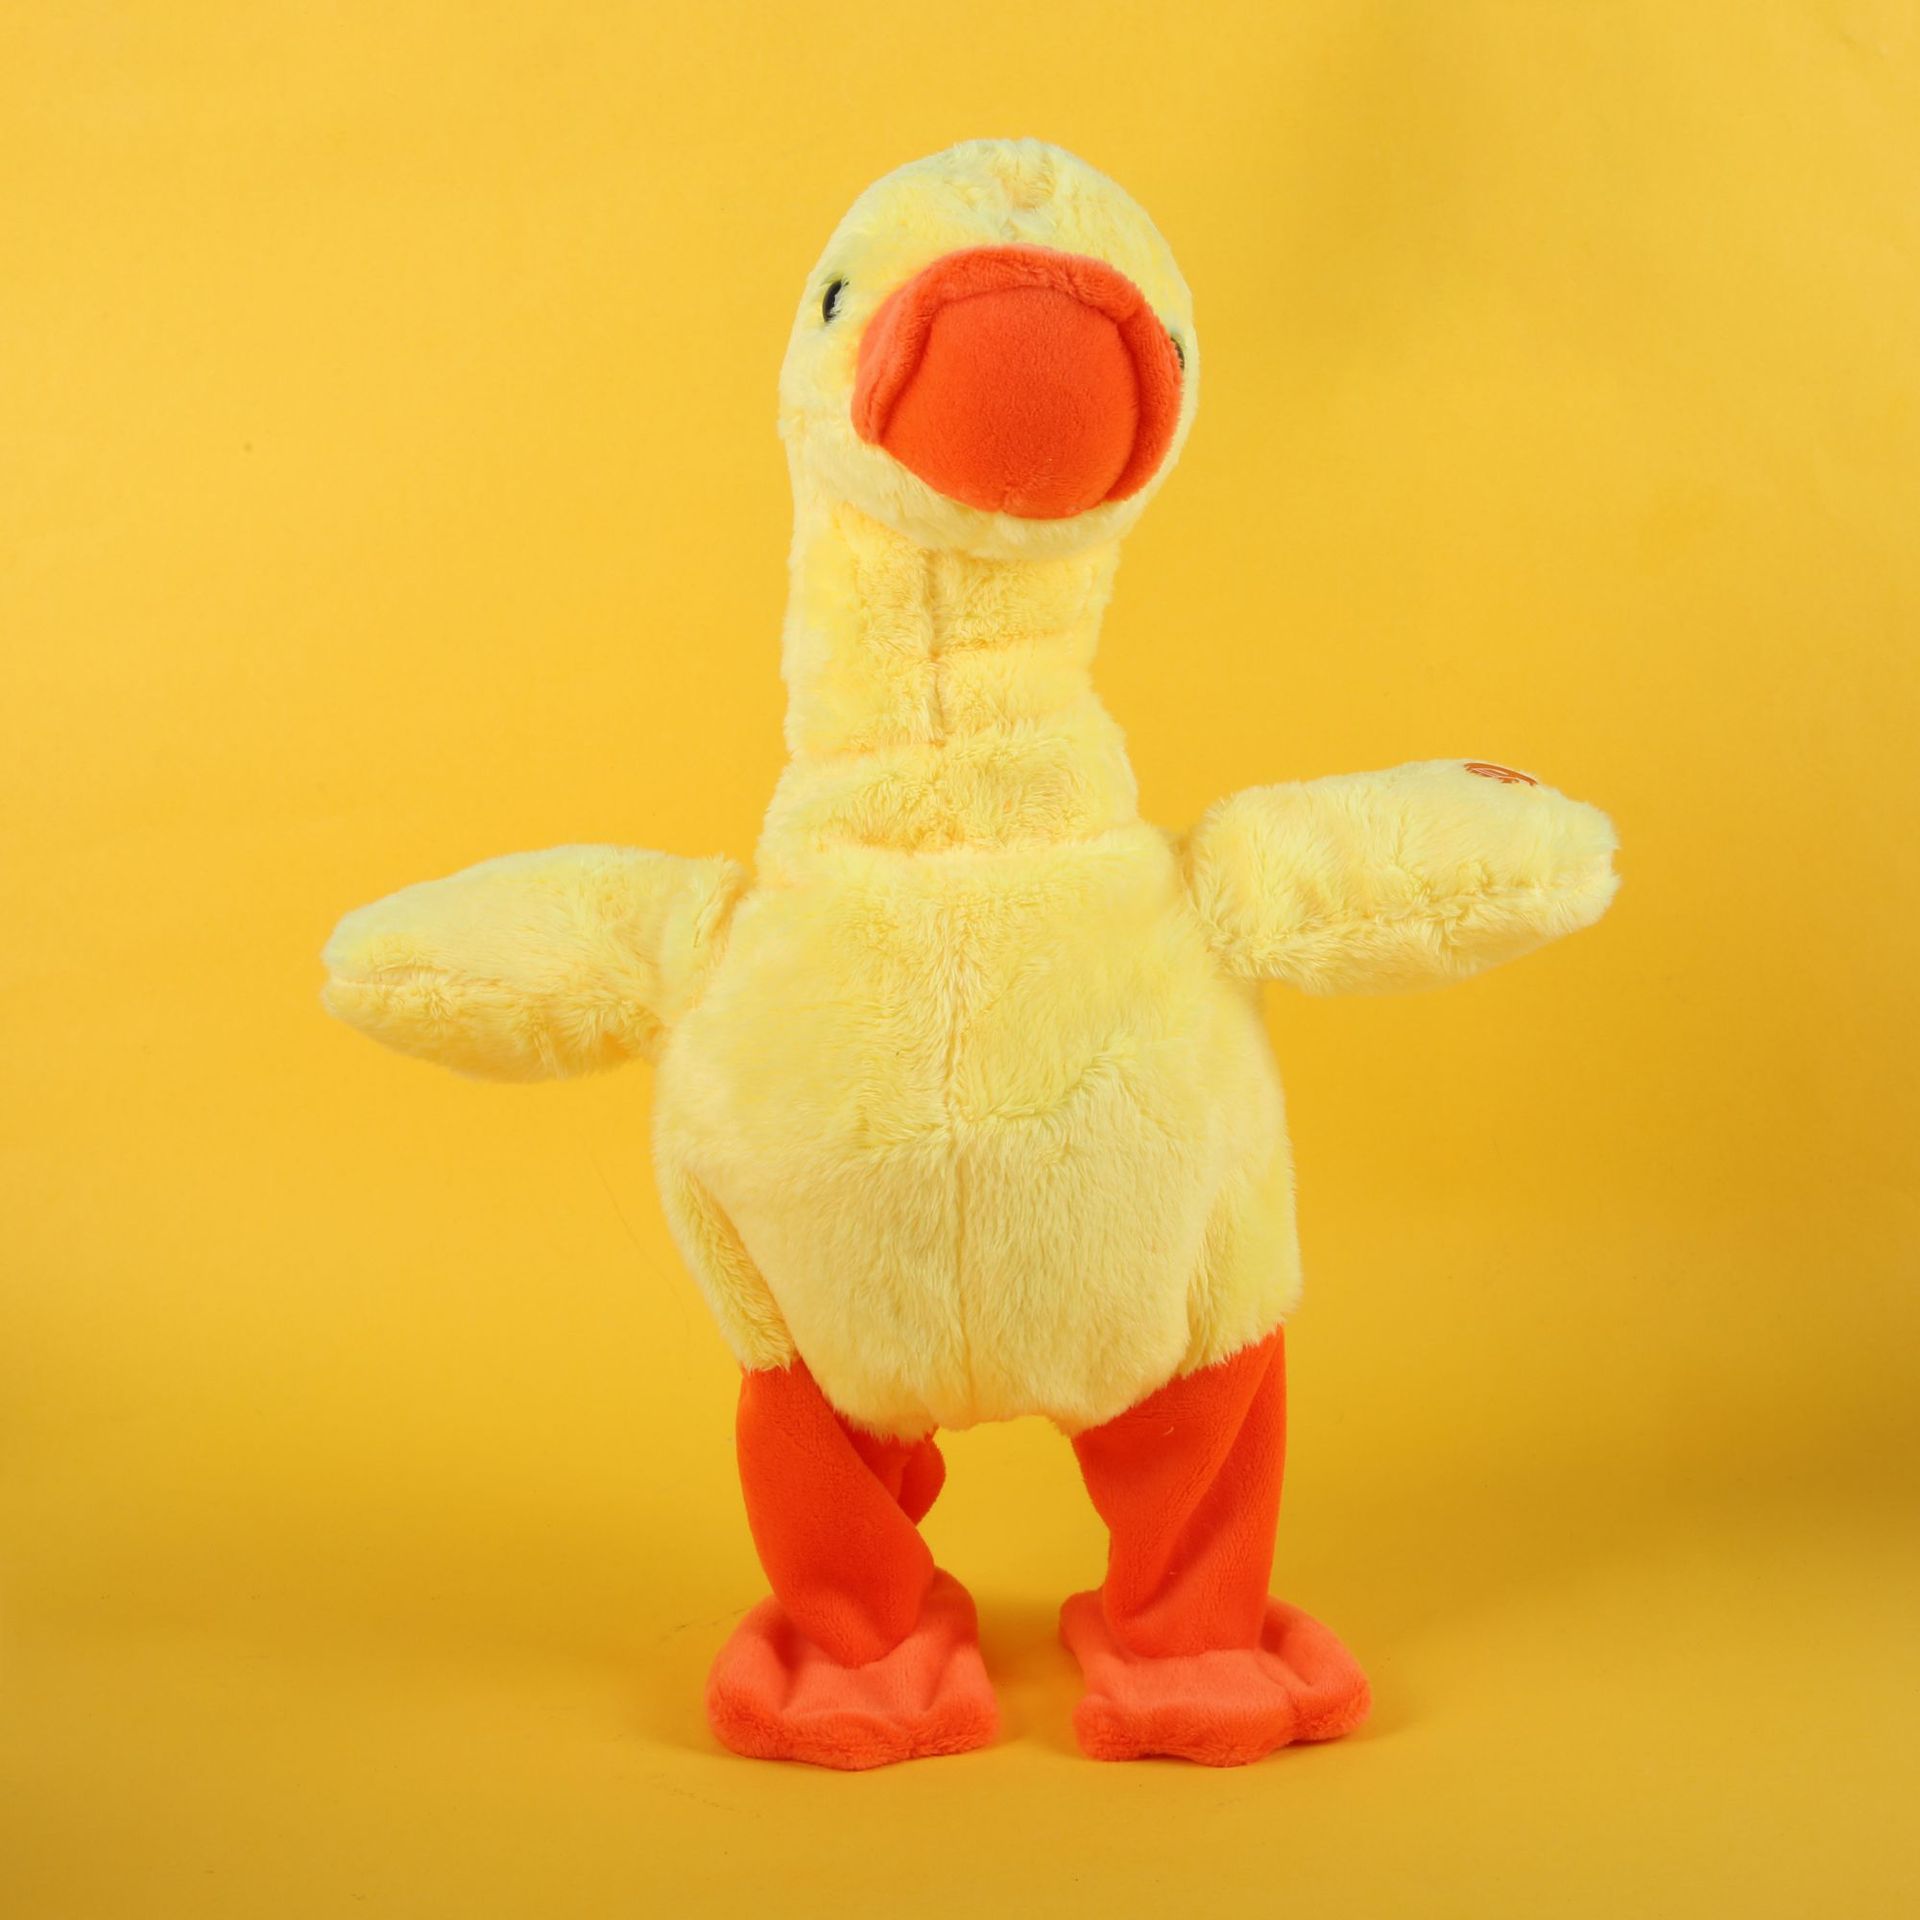 Neck Lifting Duck Plush Toy Electric Small Yellow Duck Tongue Speaking Singing Walking Duck Gift with Tuning Function